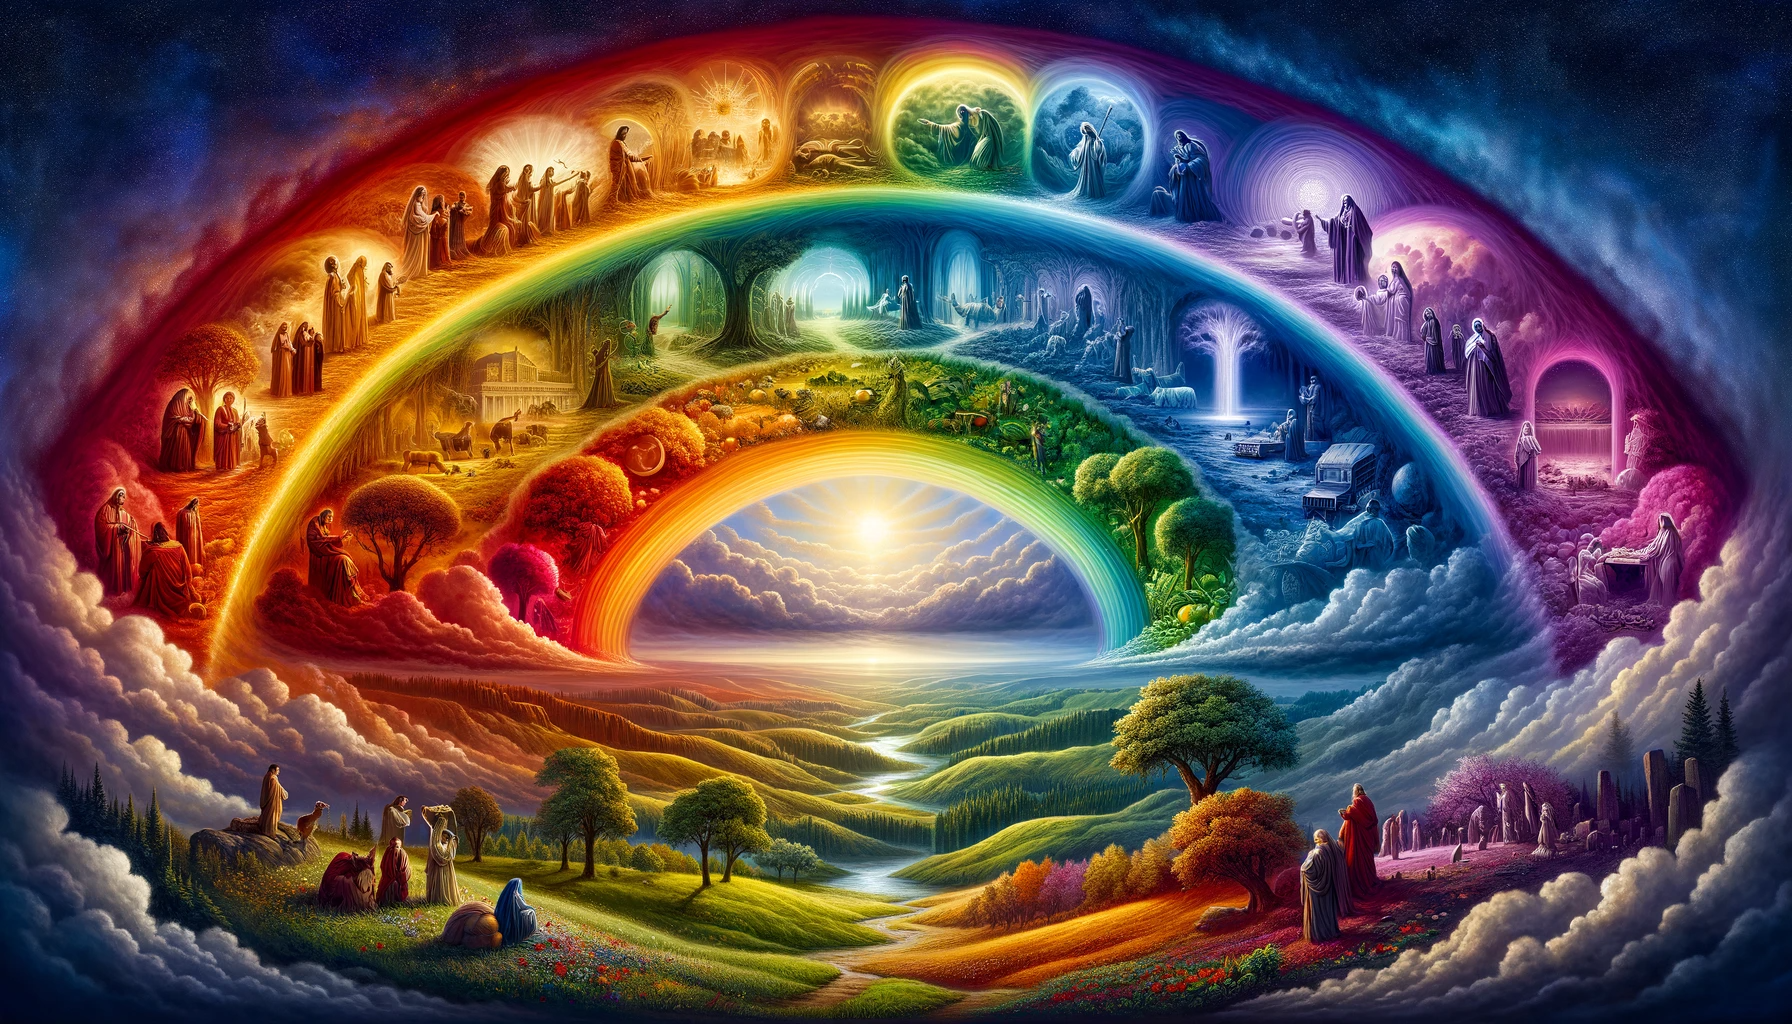 Rainbow Colors: Their Meanings, Order and Symbolism in the Bible